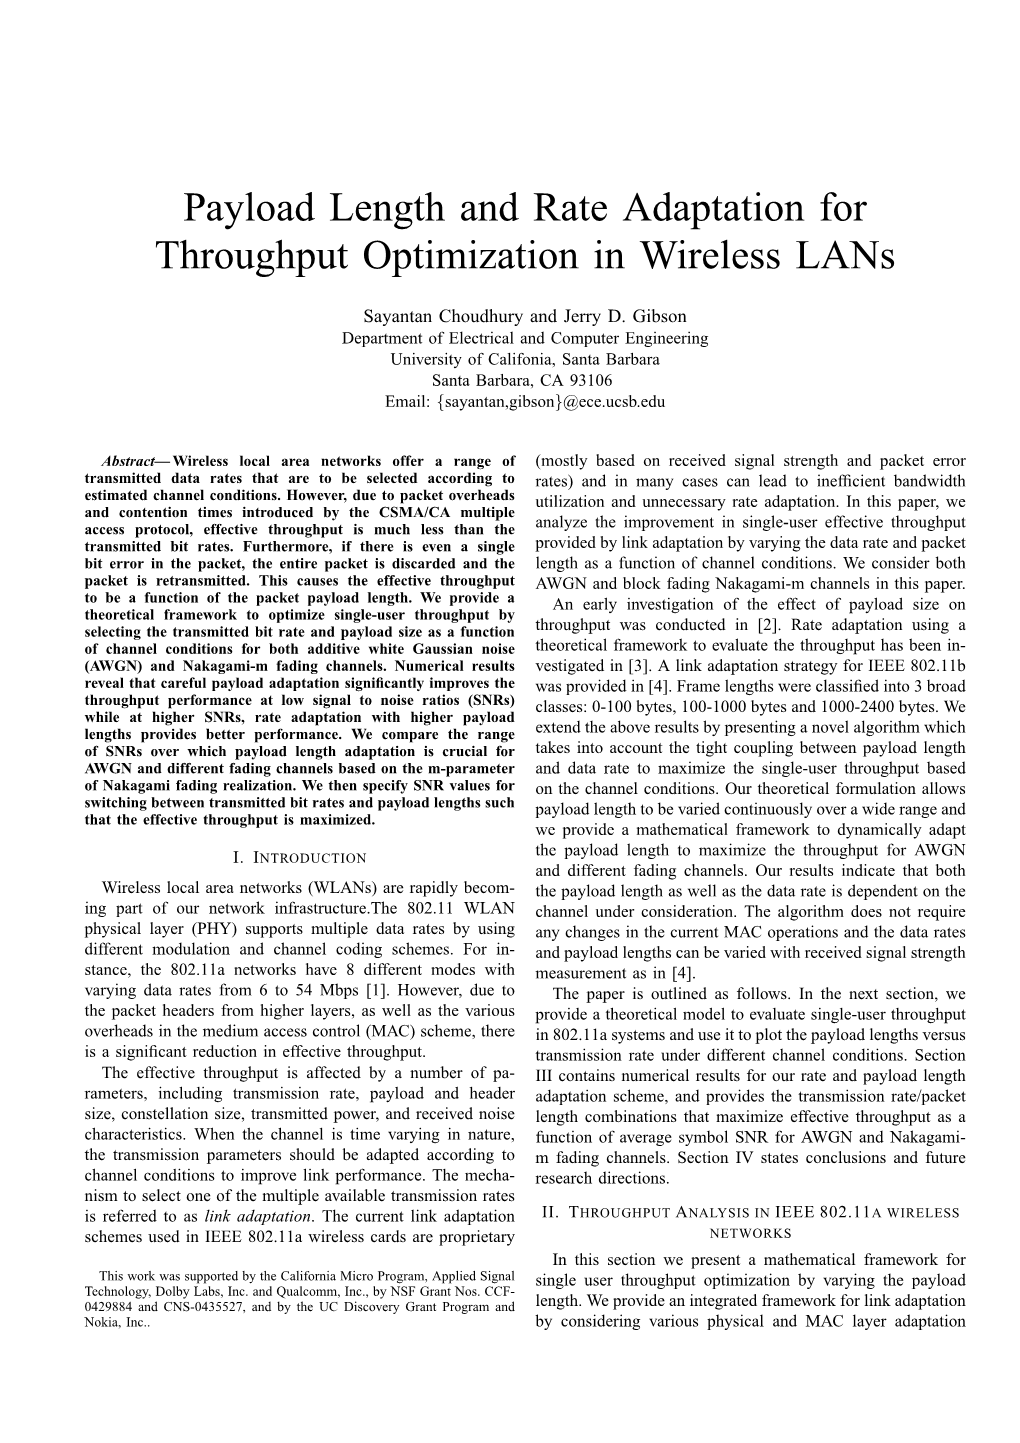 Payload Length and Rate Adaptation for Throughput Optimization in Wireless Lans